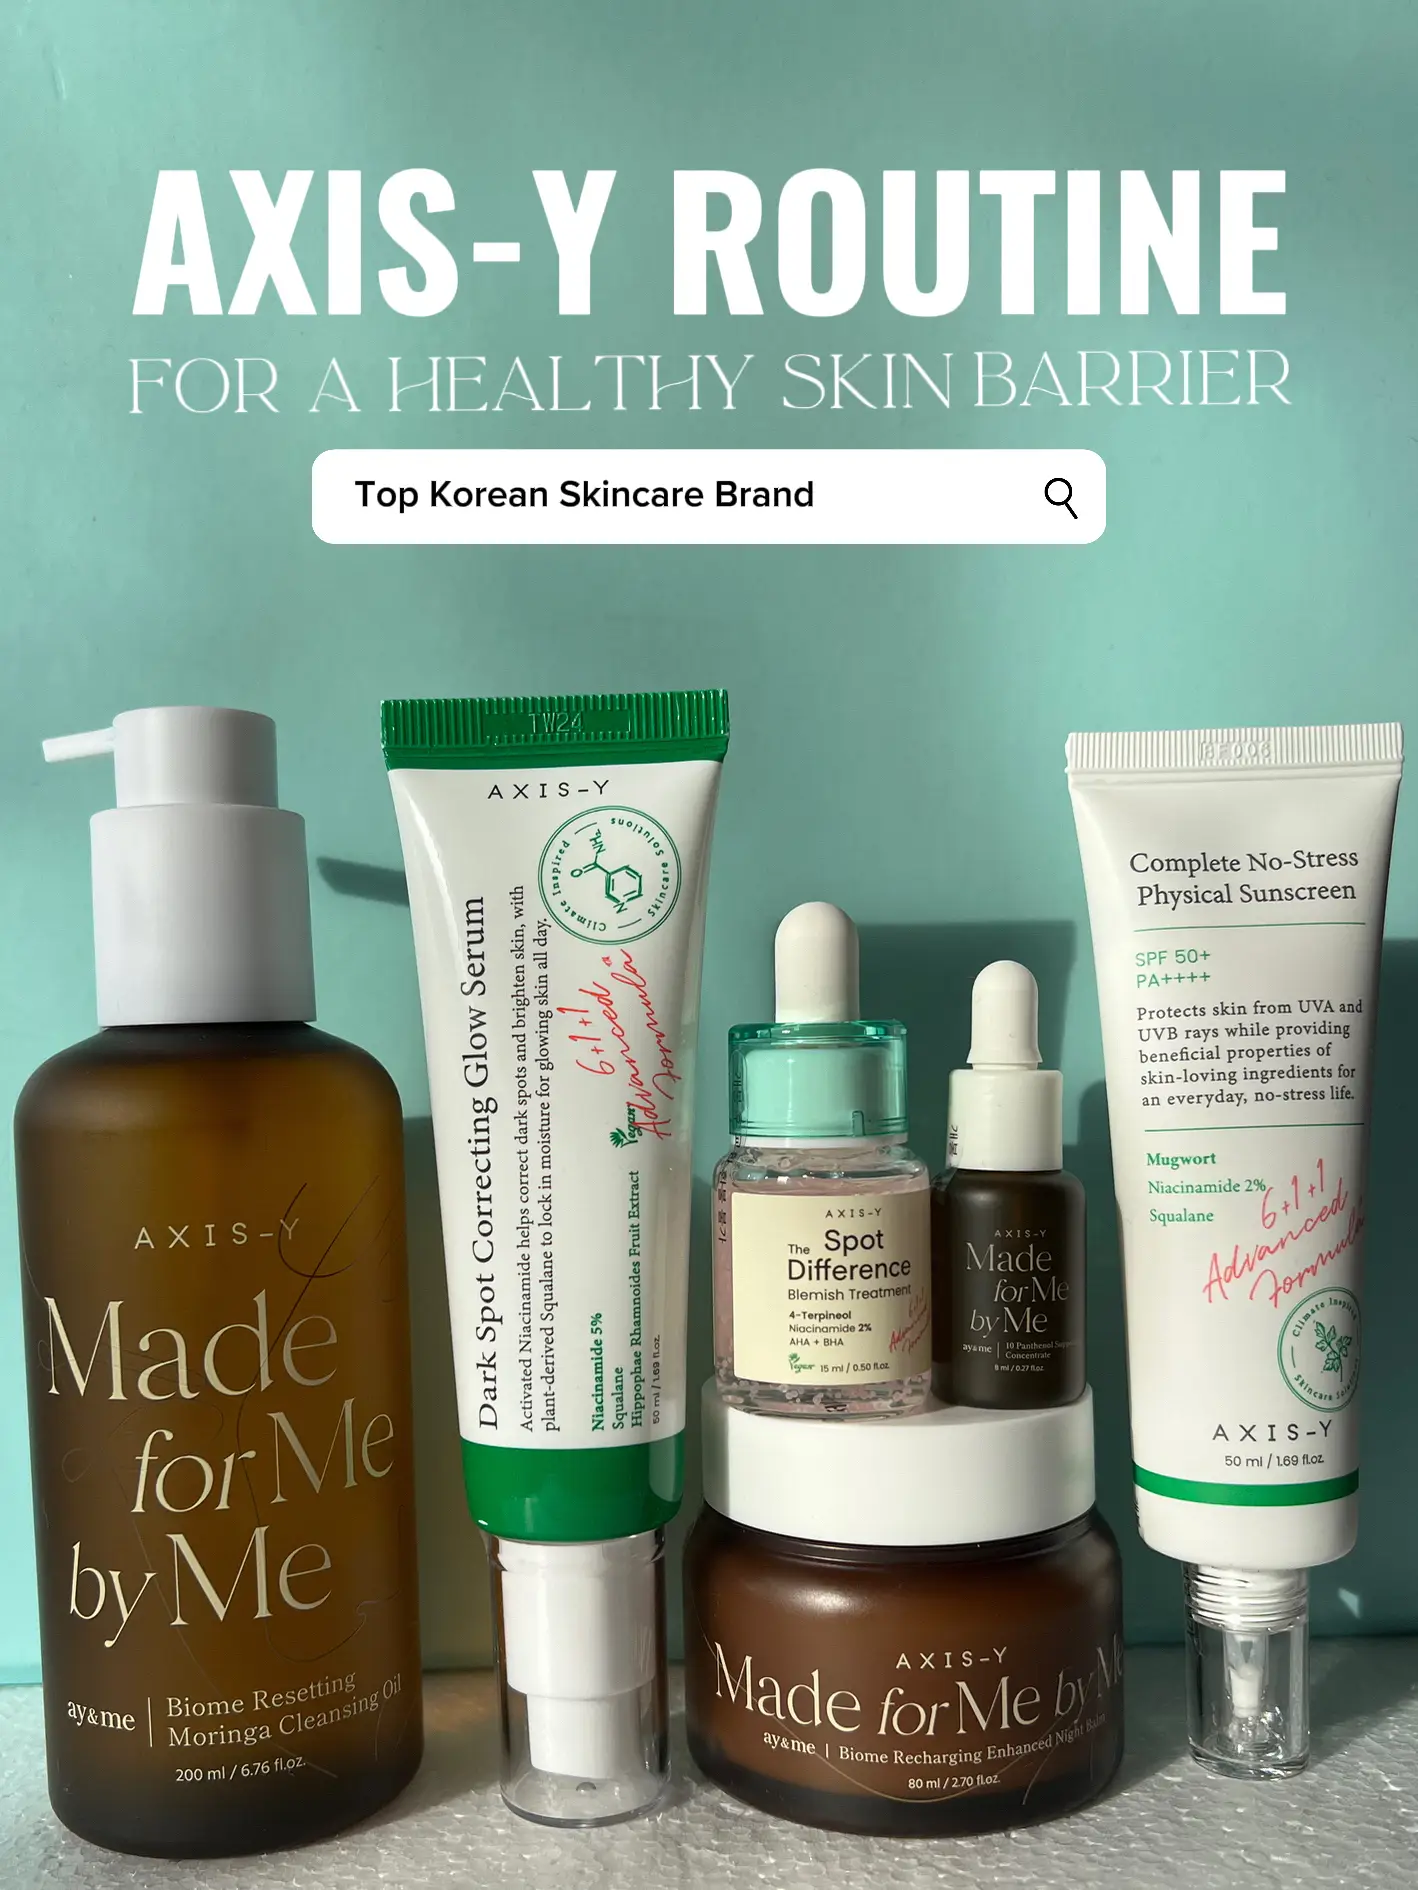 3 lightweight Korean skincare products for under £17 from AXIS-Y to add to  your routine - A Woman's Confidence